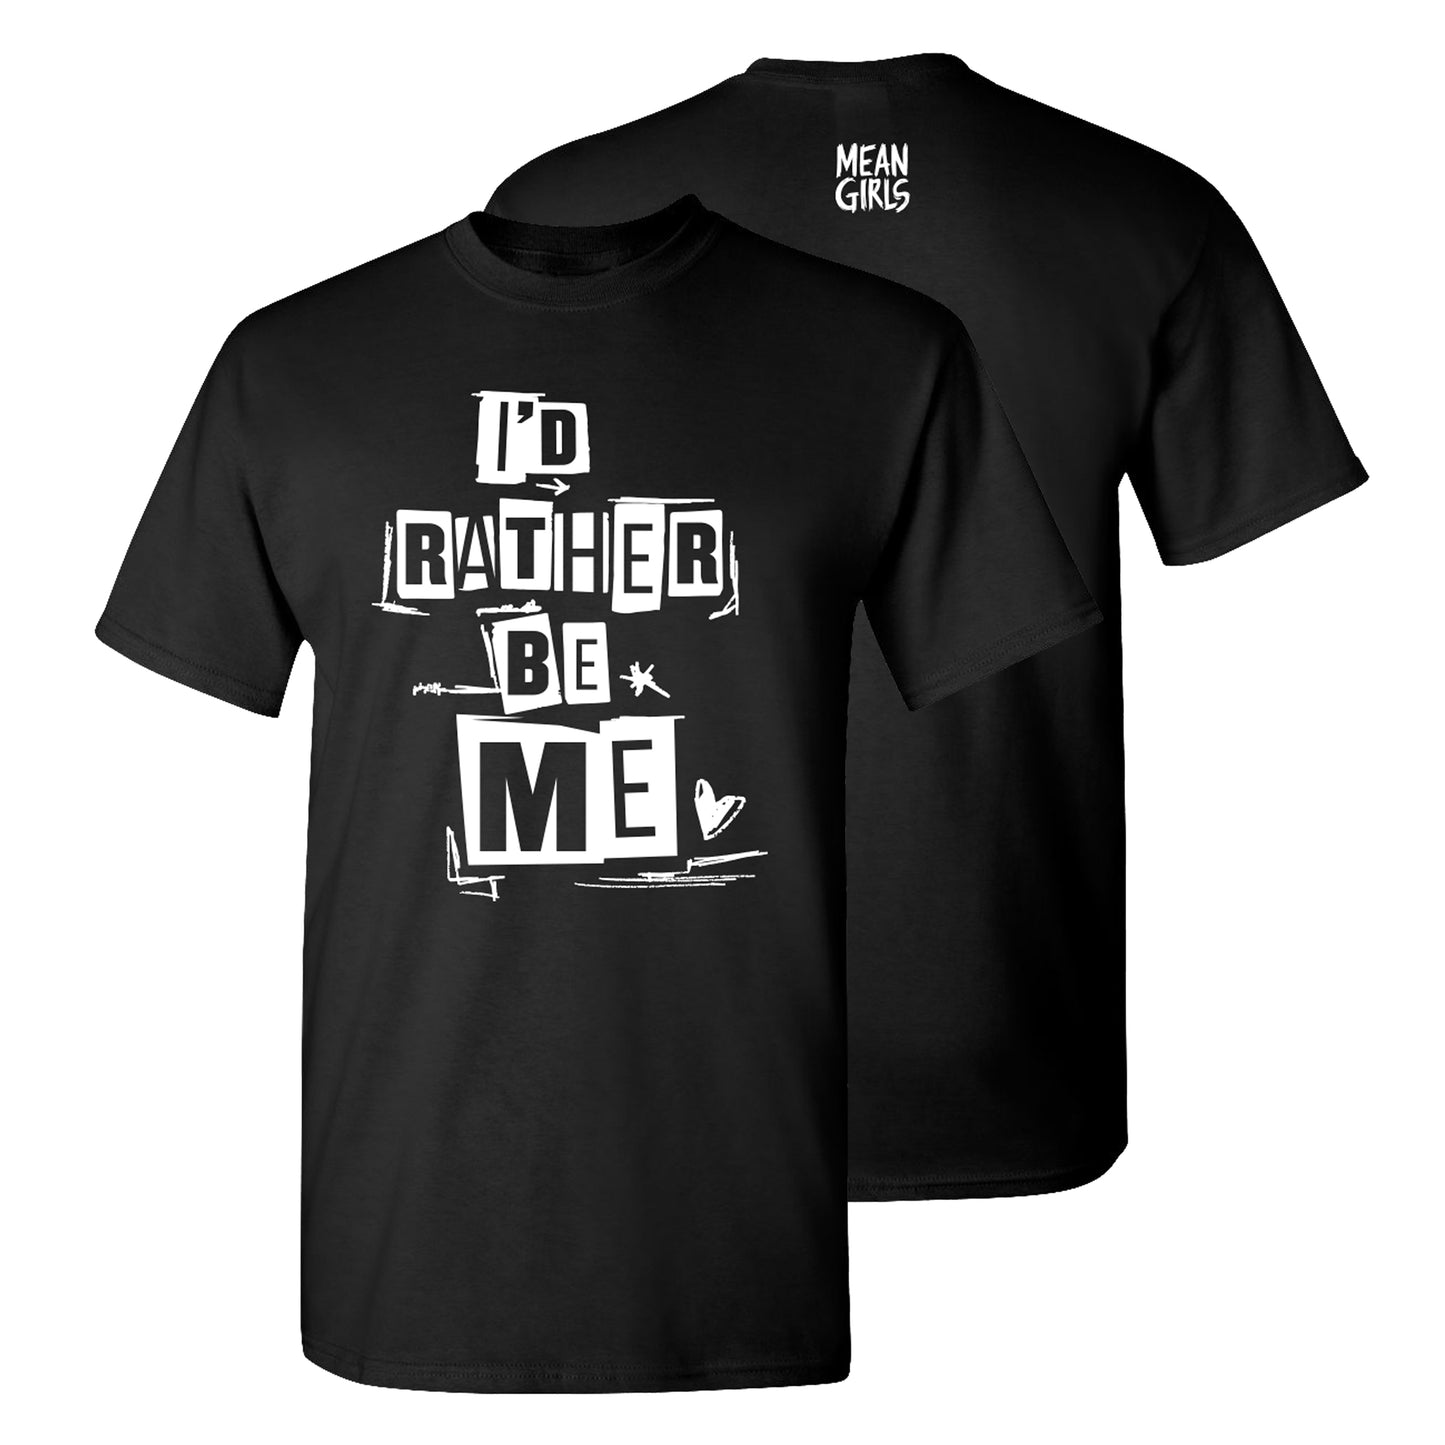 MEAN GIRLS I'd Rather Be Me YOUTH T-Shirt